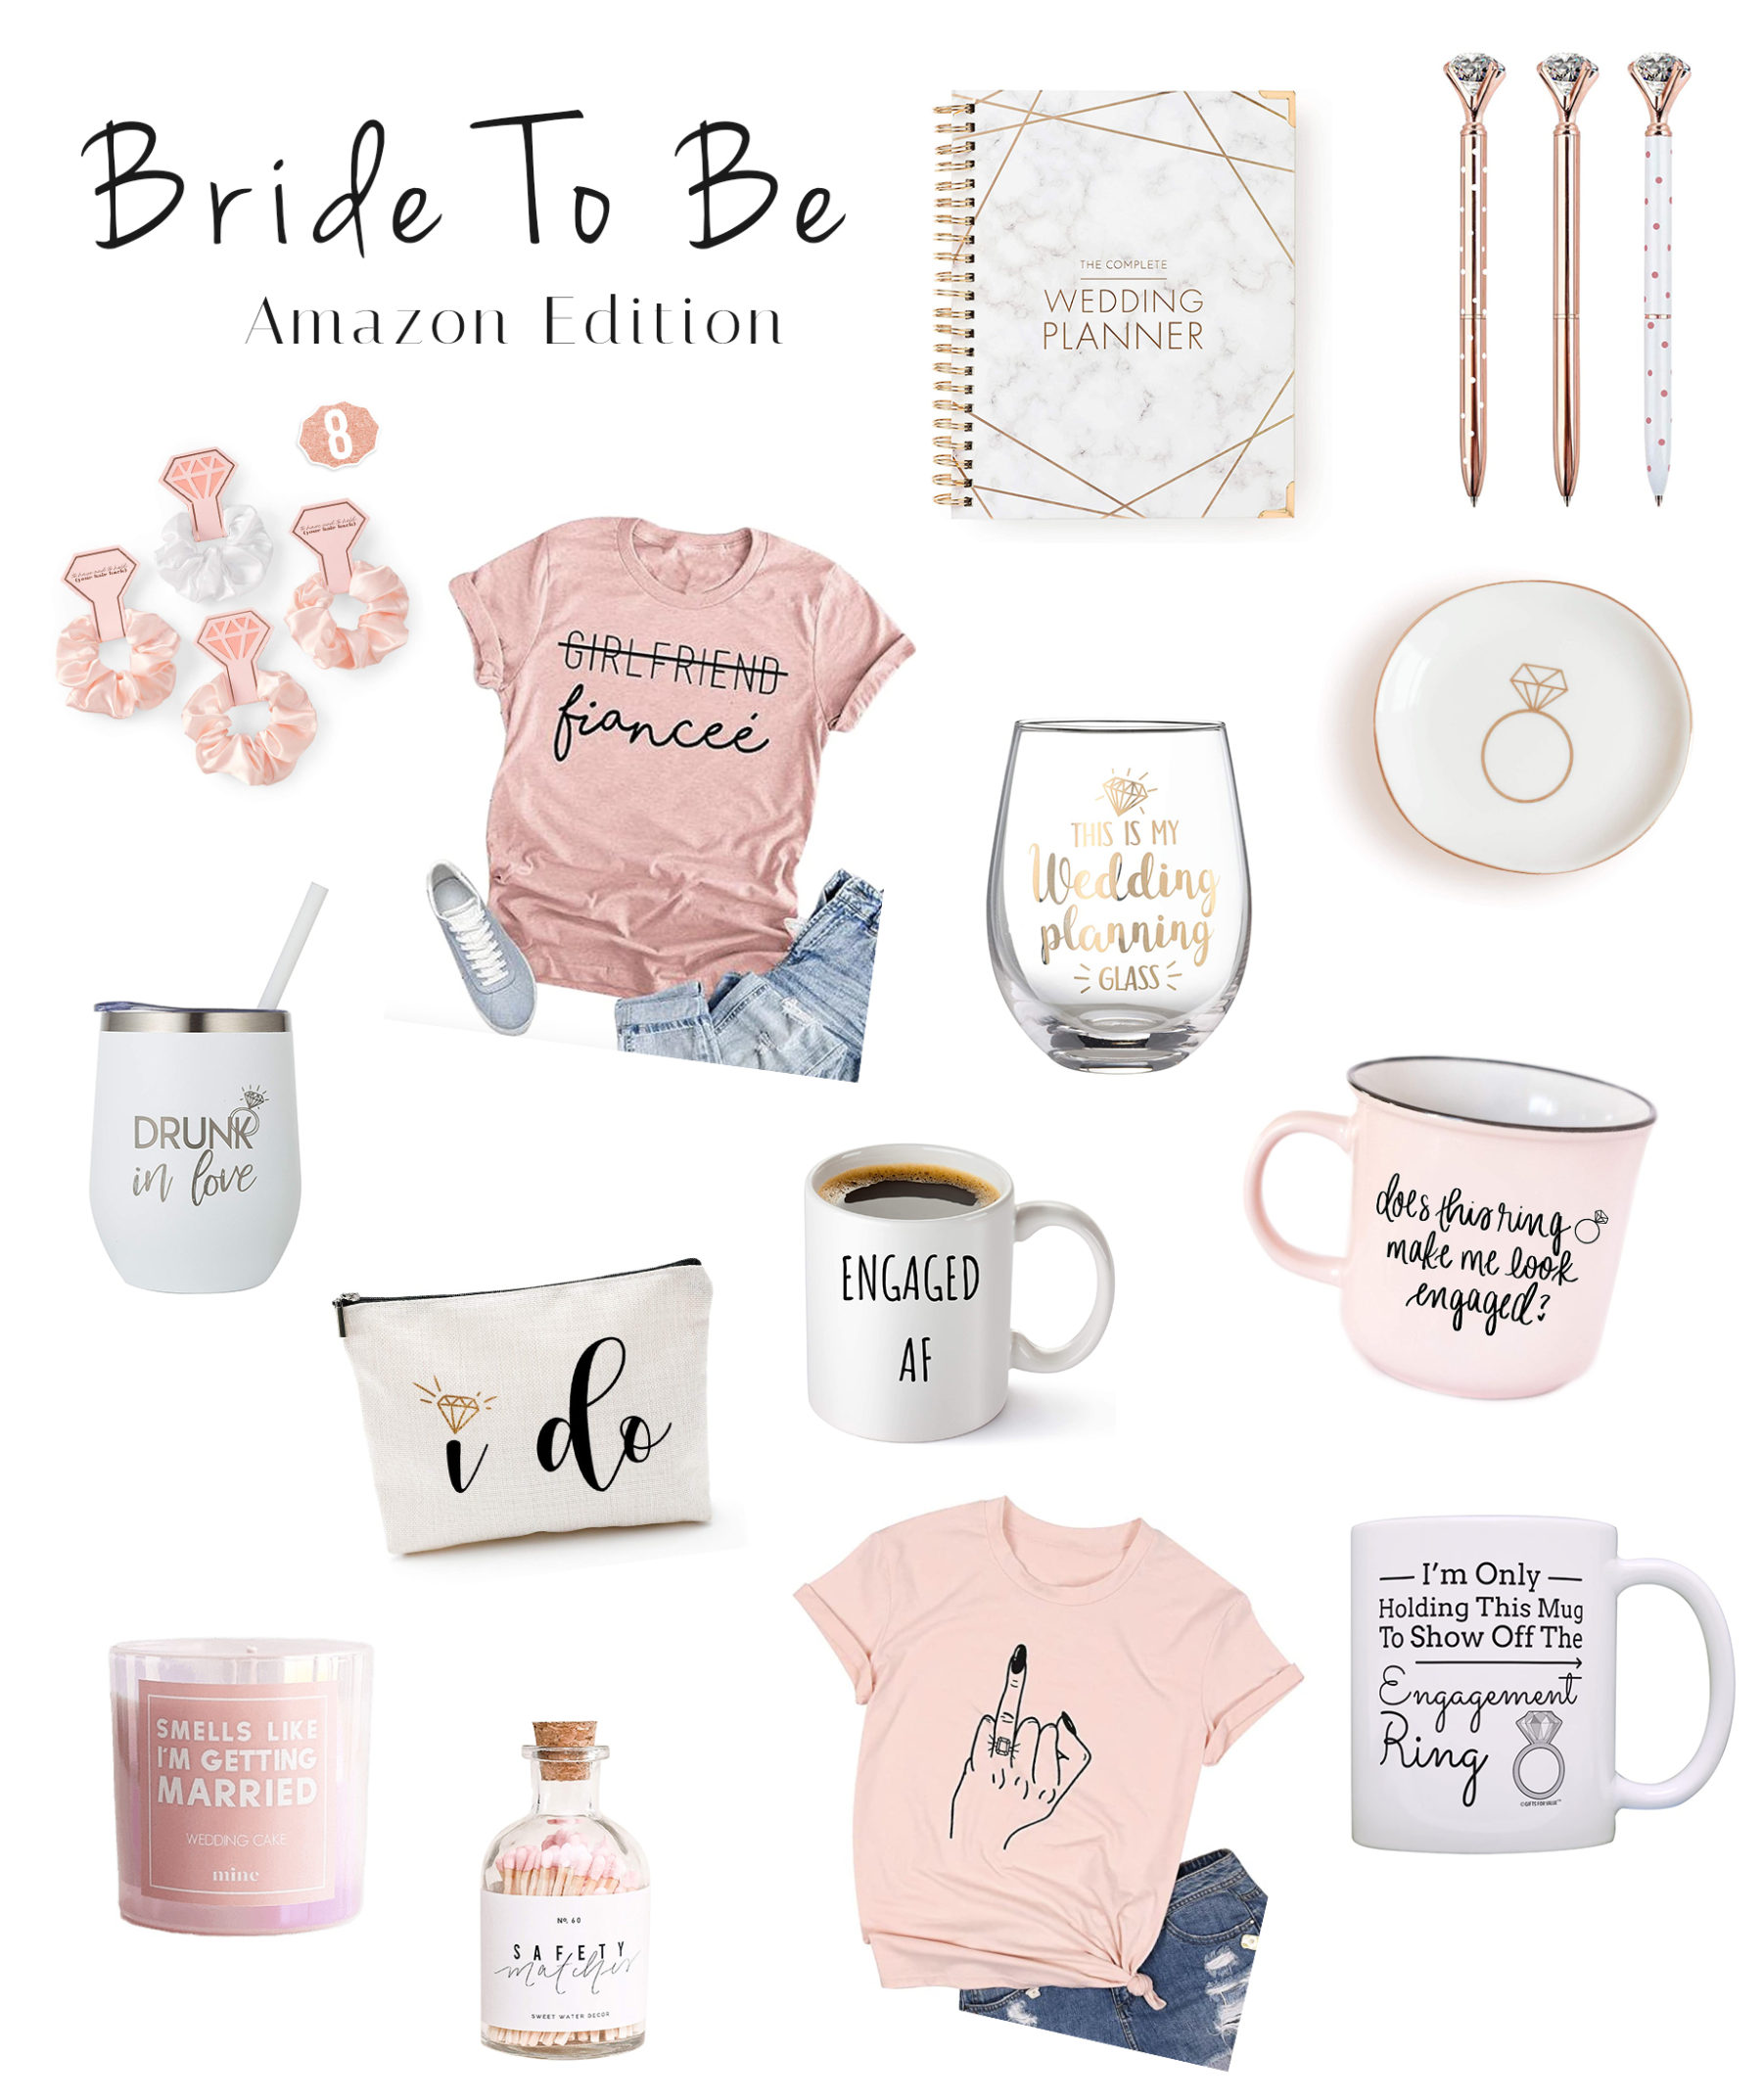 Bride to be | Amazon Finds | Amazon Bride | Engaged af | engagement ring | Blondie in the City by Hayley Larue